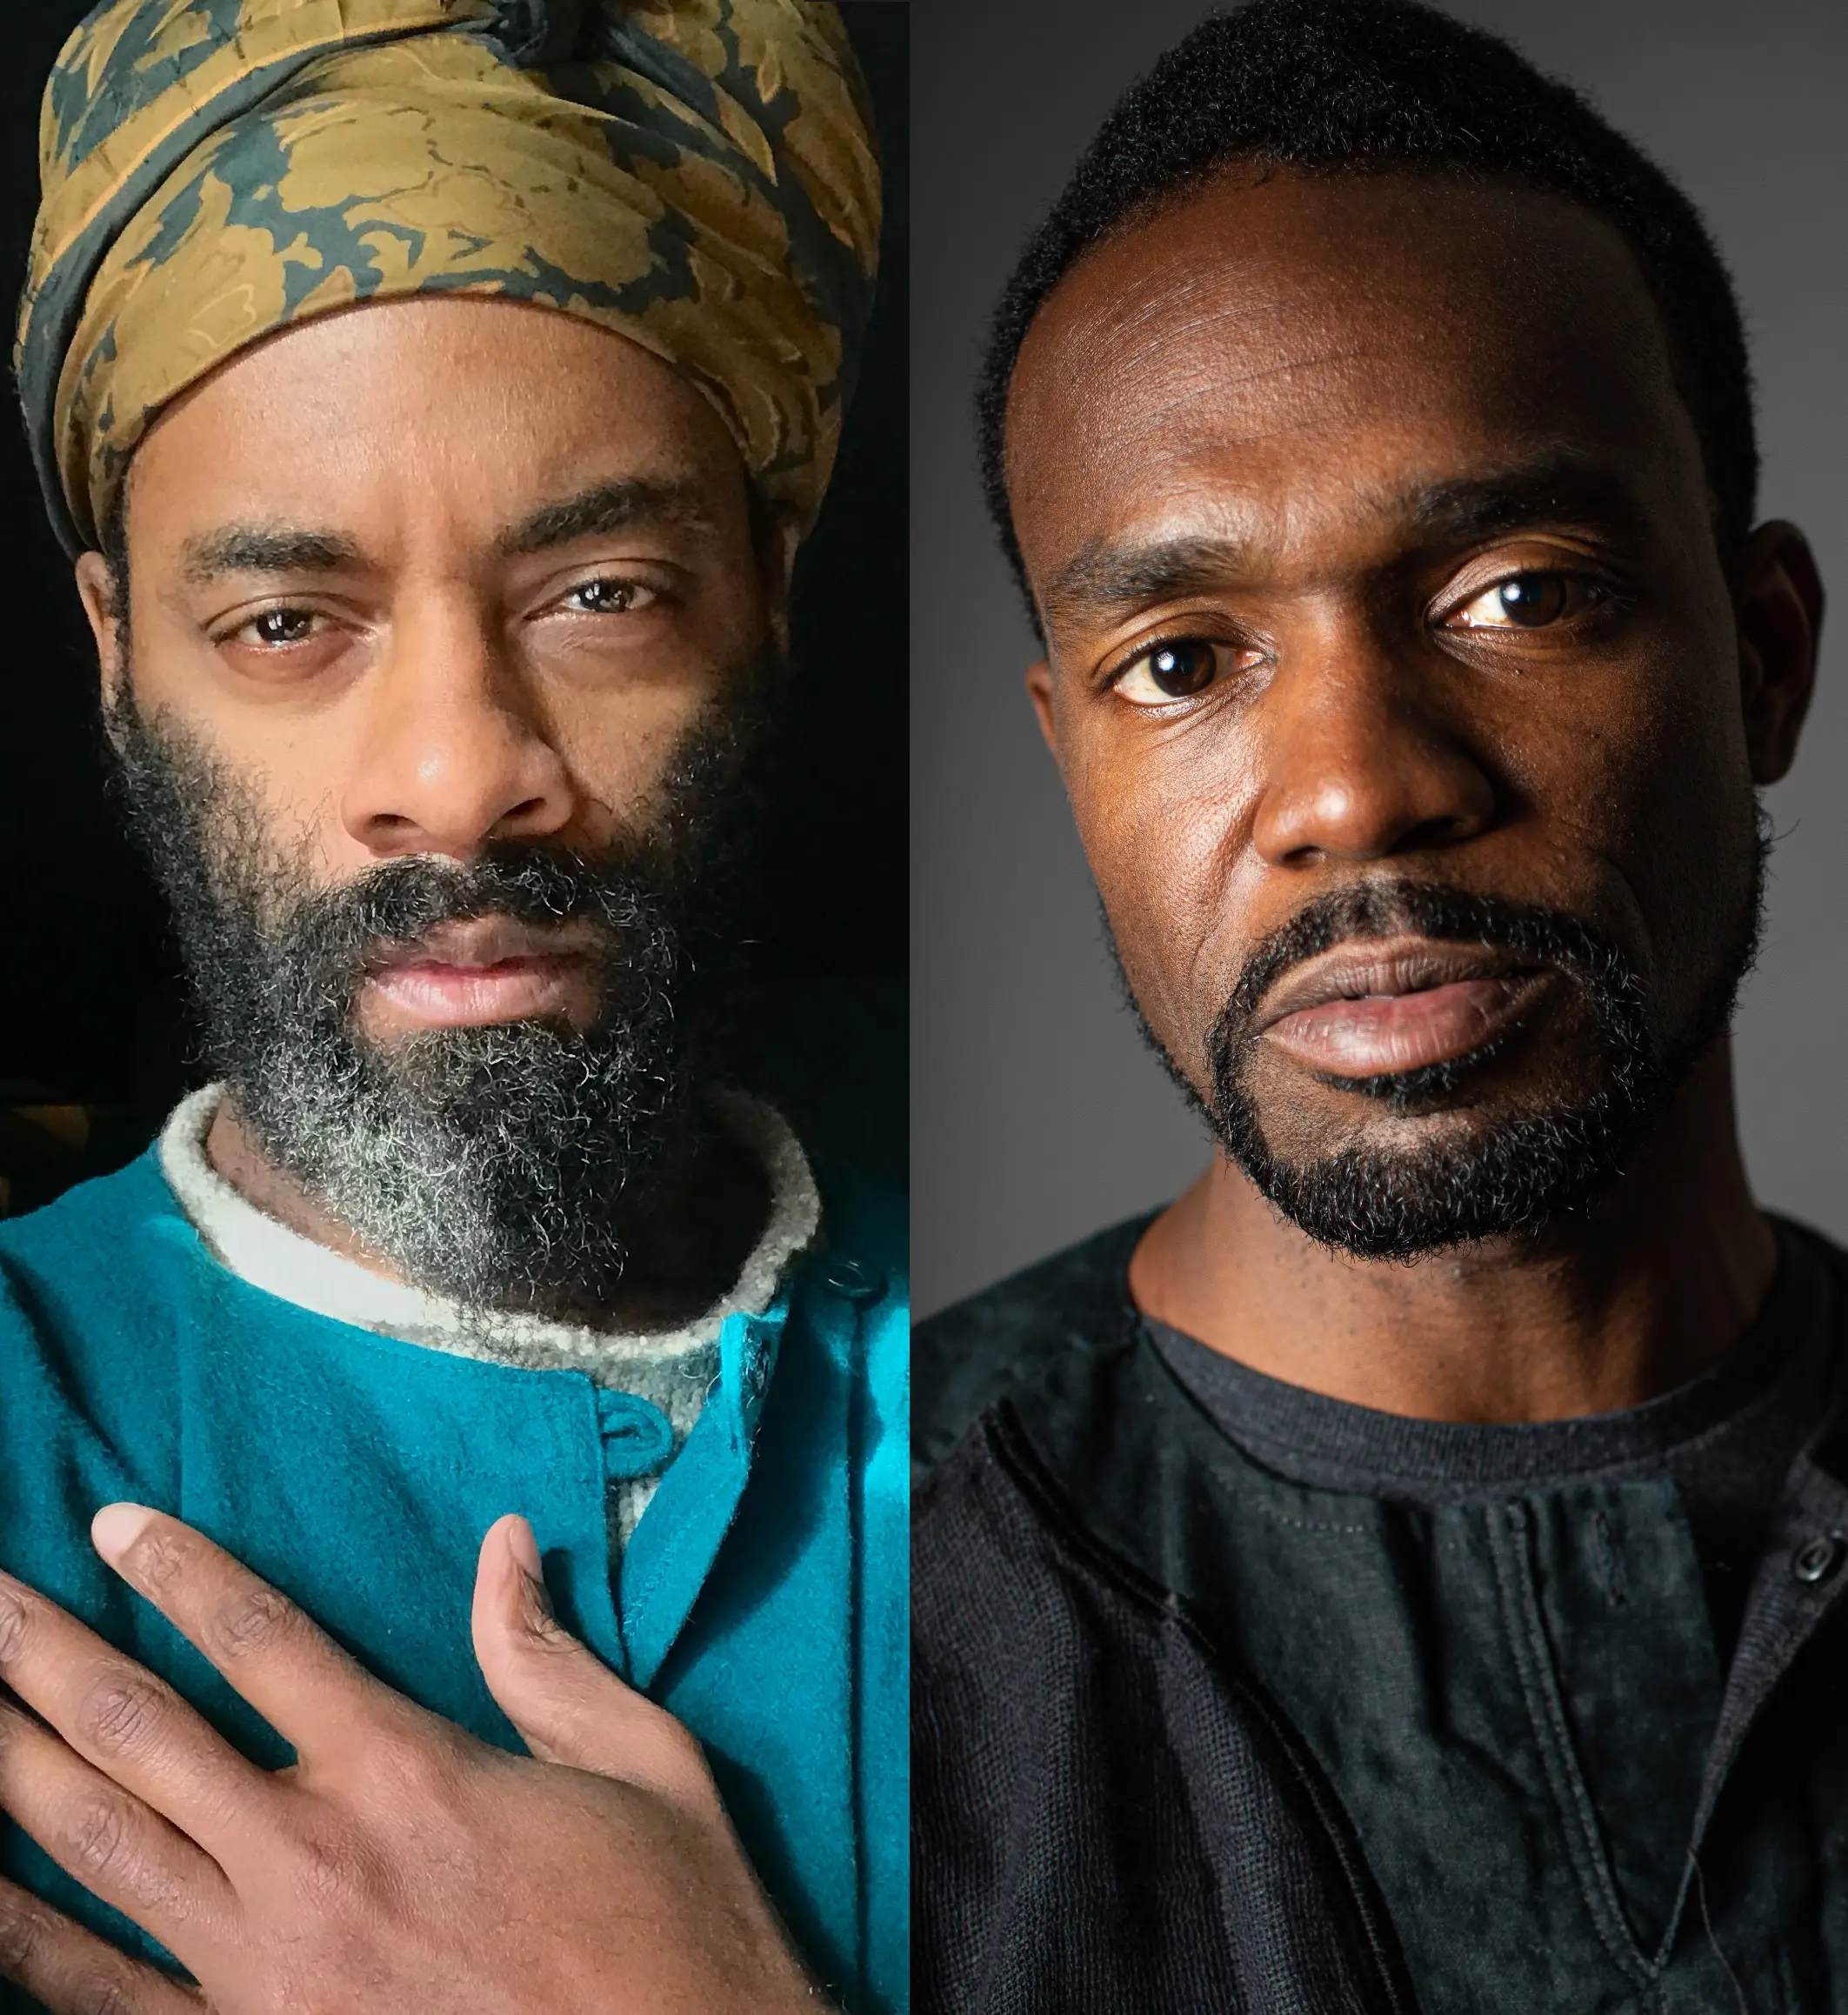 Photo portrait of LaMont on the left, a black man with blue shirt and medium beard wearing a headscarf, and André on the right, a black man with short beard and a black shirt, both men stairing directly into the camera. 